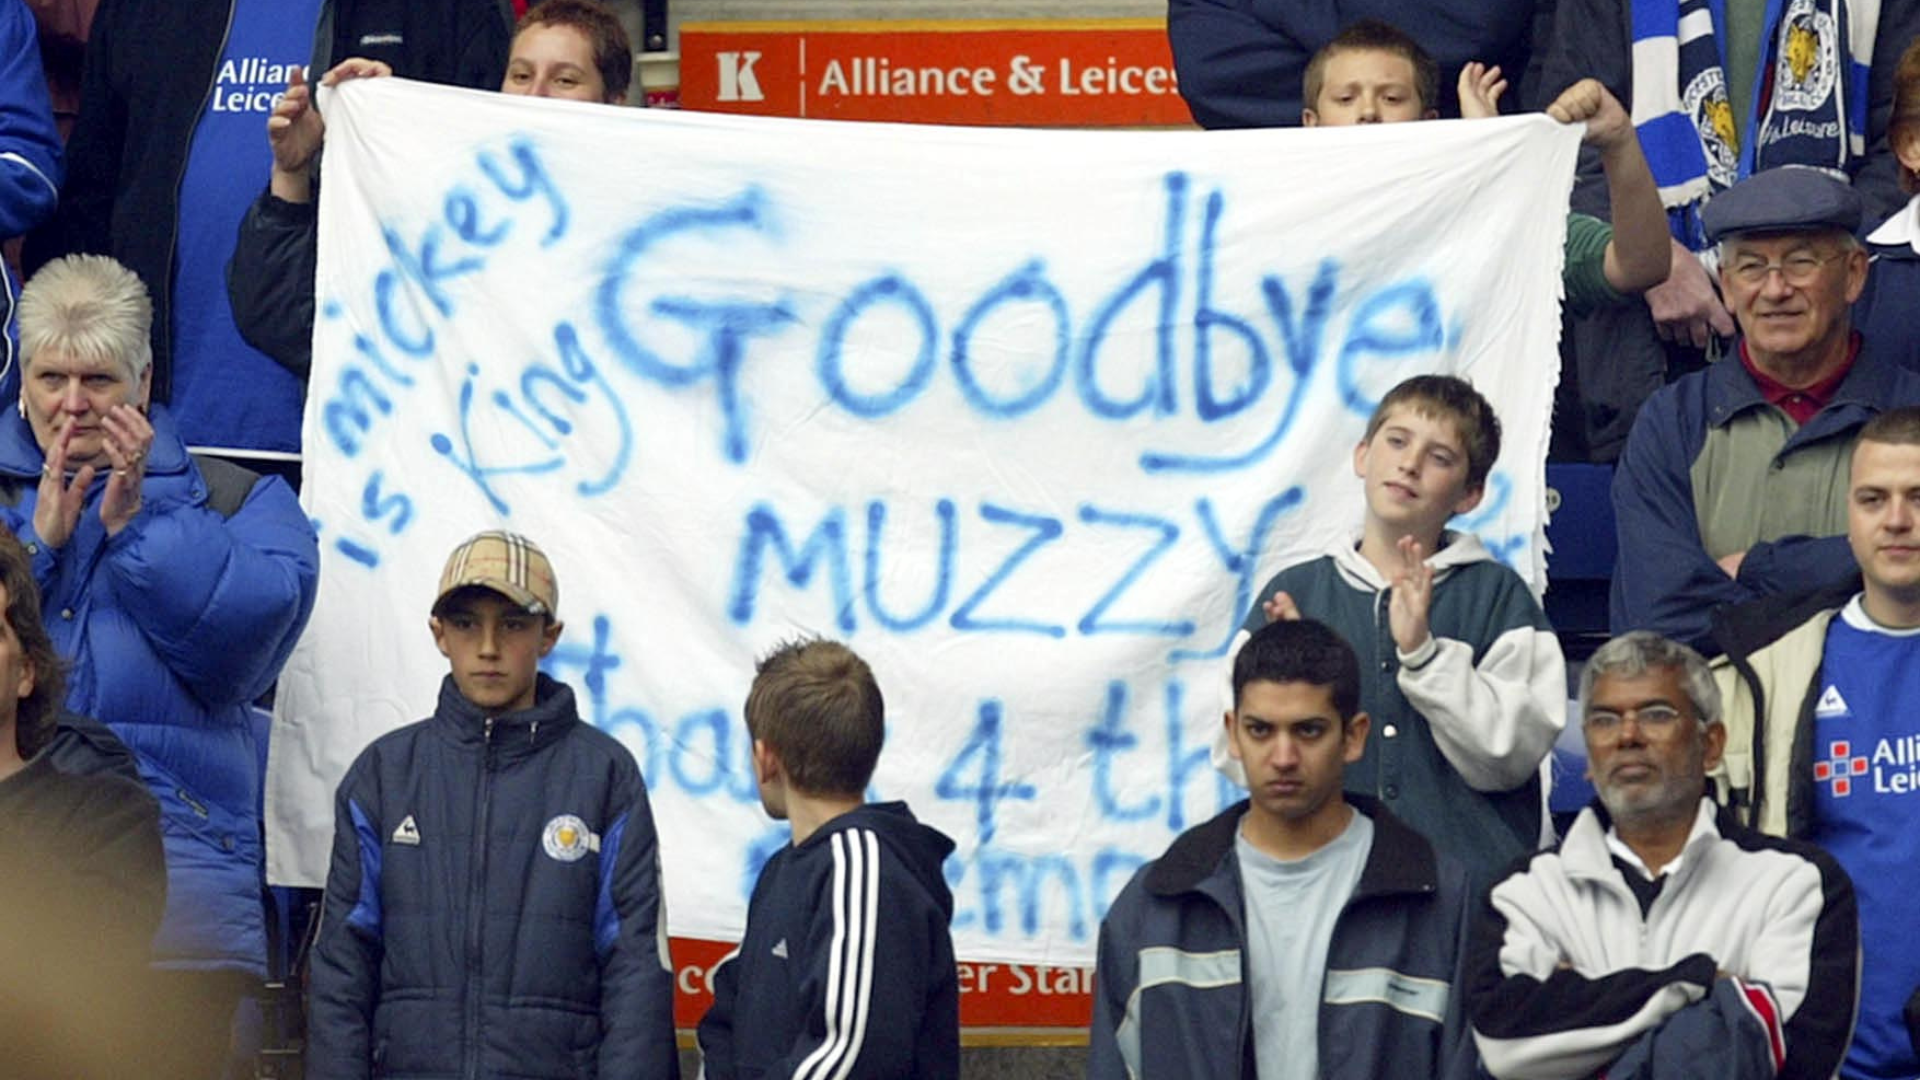 Banner during Muzzy Izzet's last home game for Leicester City